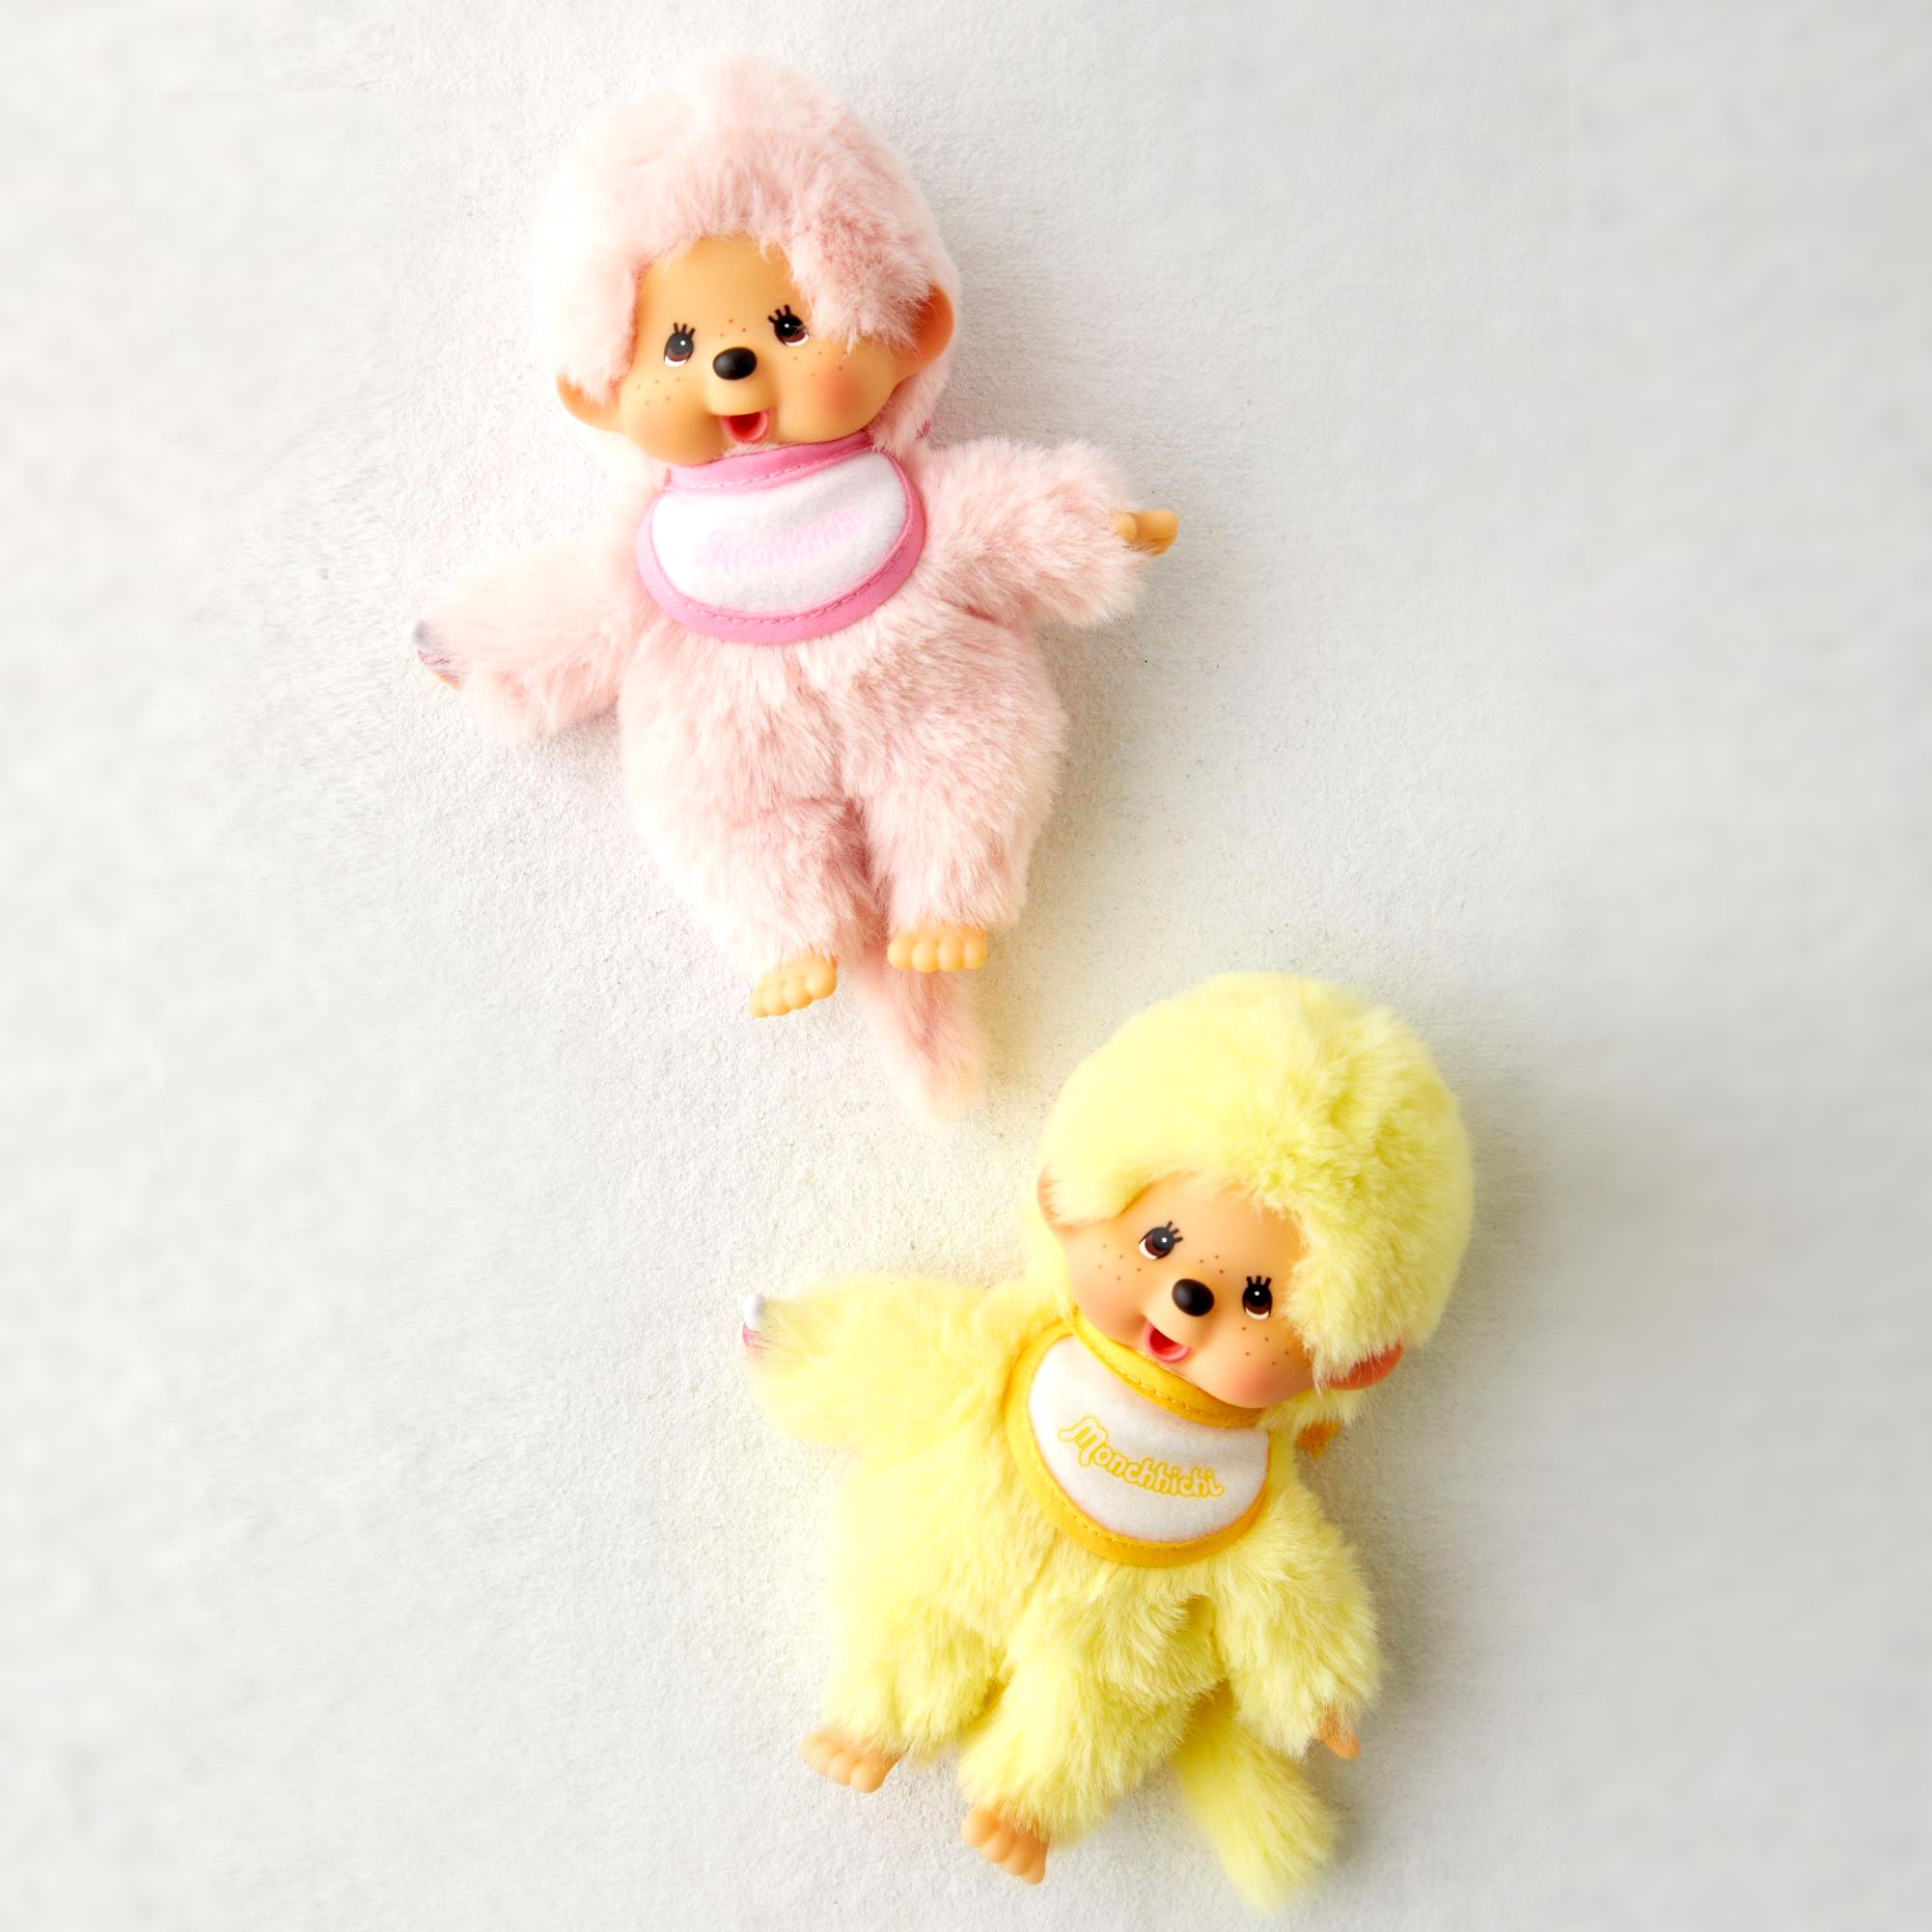 Colored Monchhichi 15 cm (Available in 3 colors)